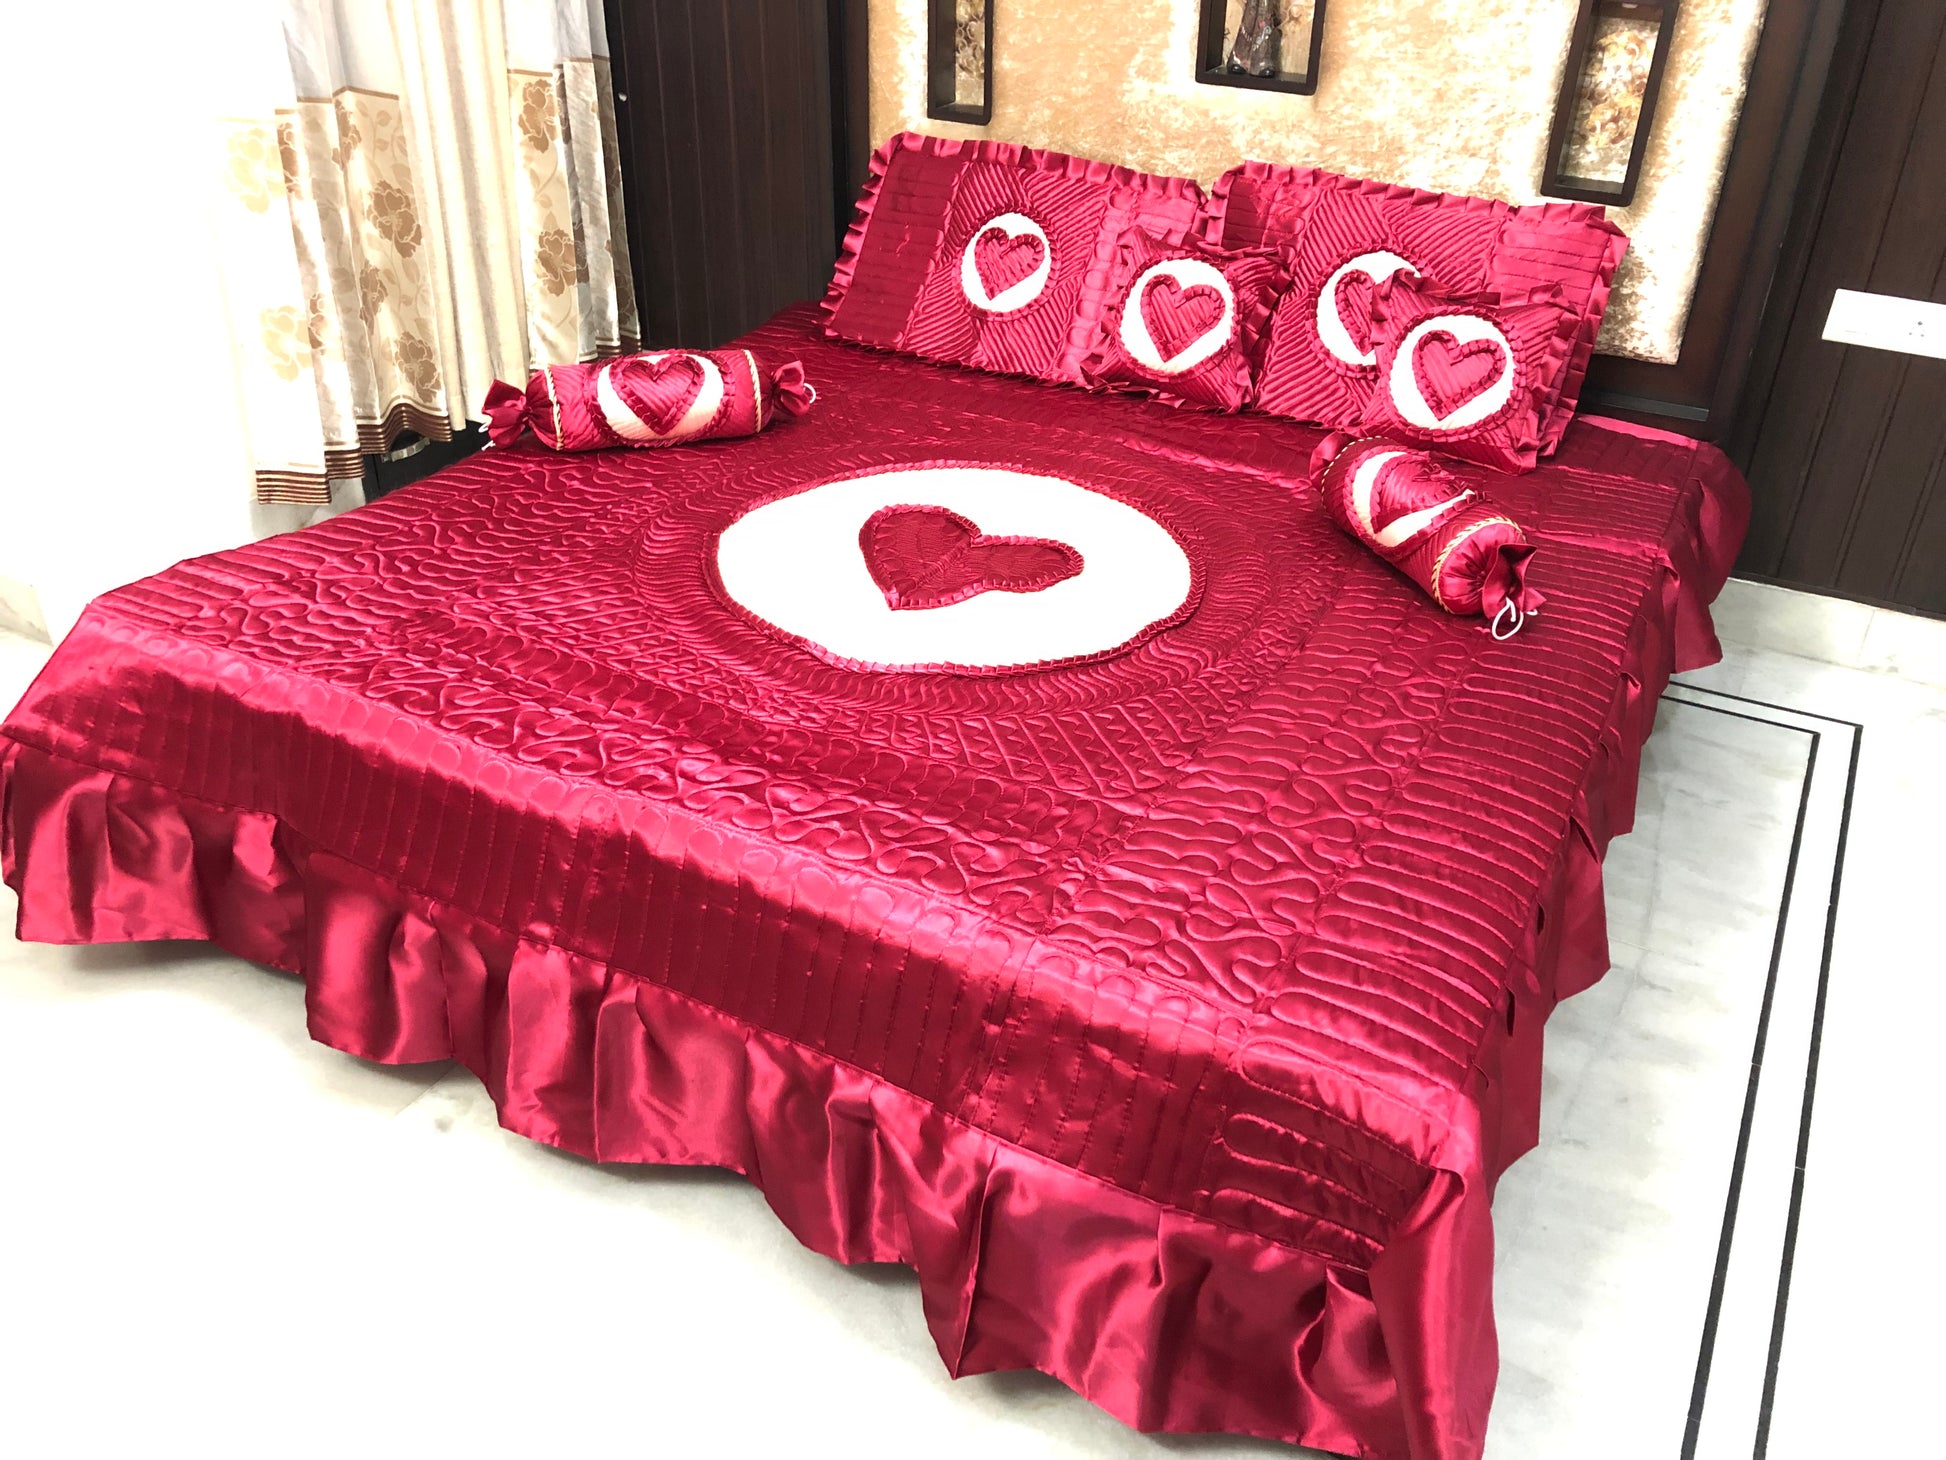 loomsmith-satin-bedsheet-set-of-7-heart-design-in-maroon-color-two-filled-cushions-two-filled-bolsters-King-Size-set-two-pillow-covers